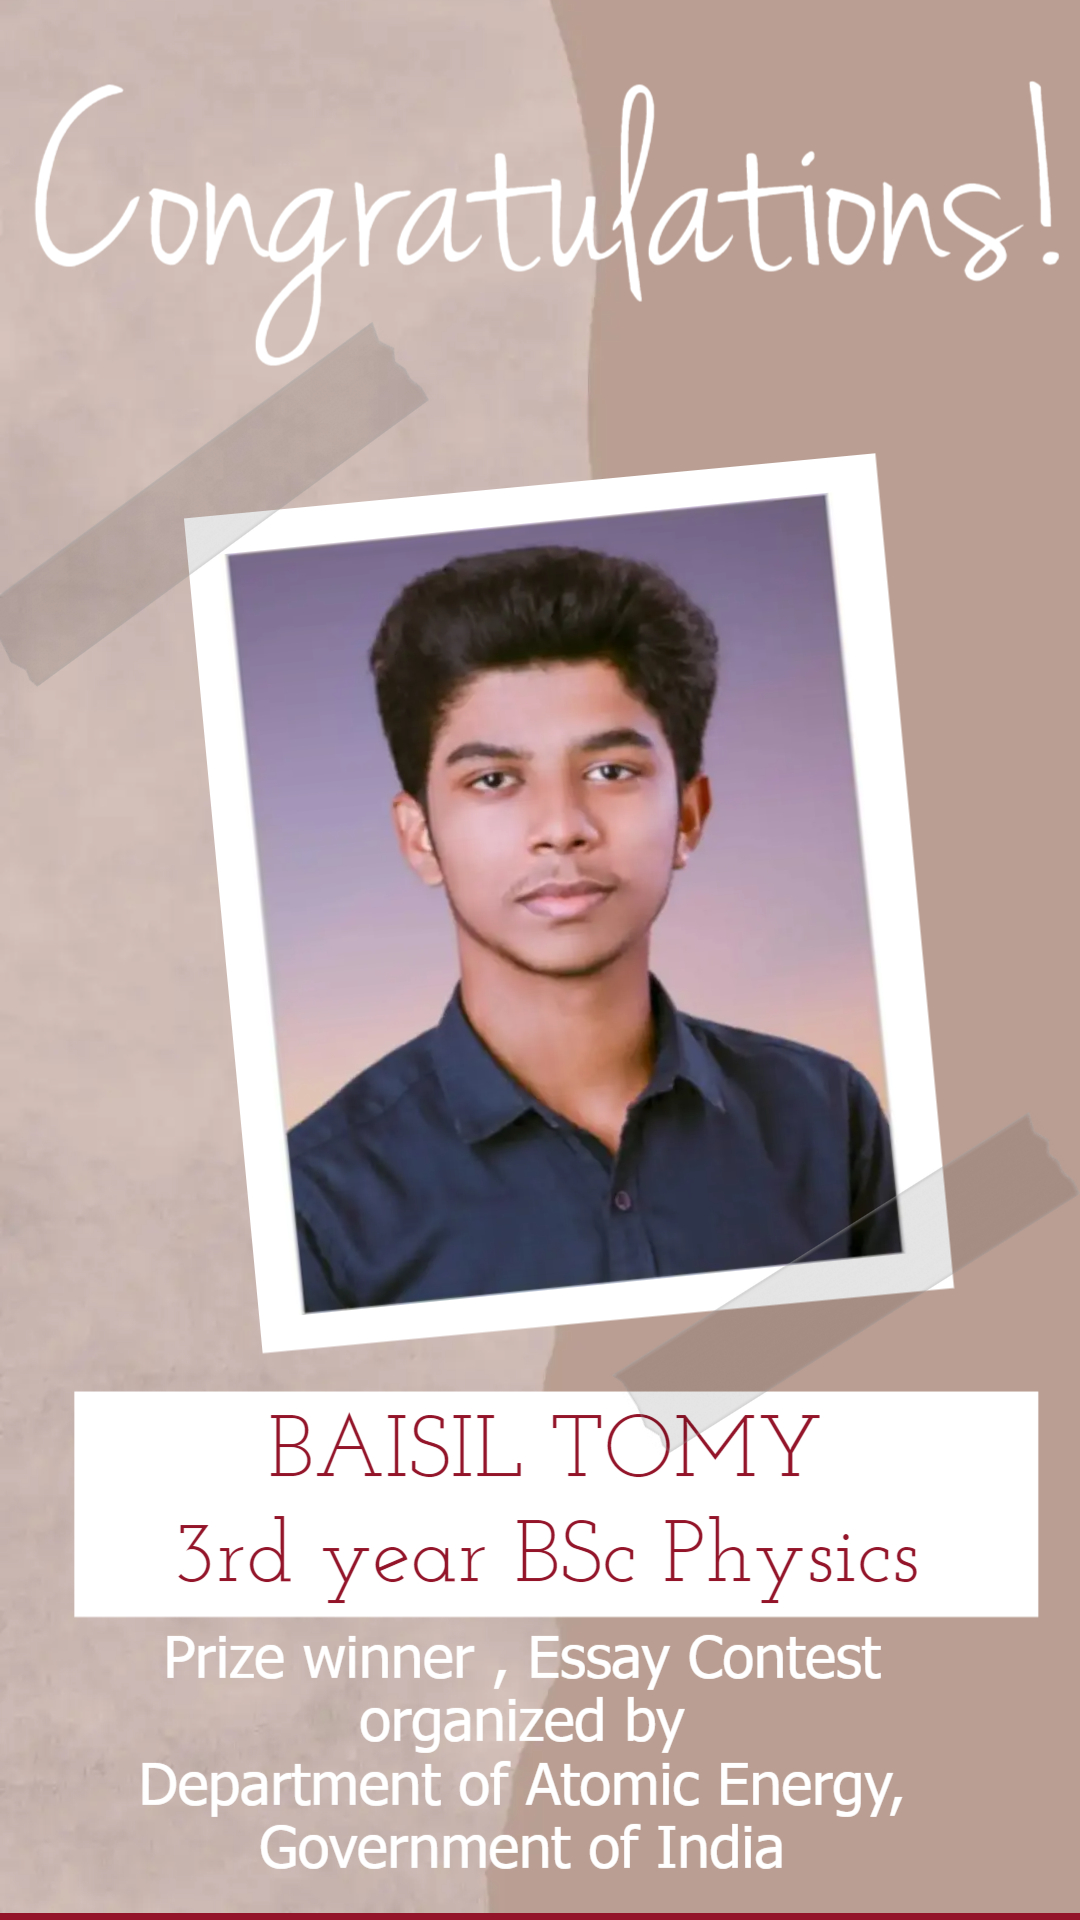 Baisil Tomy secured prize in essay contest by Department of Atomic Energy